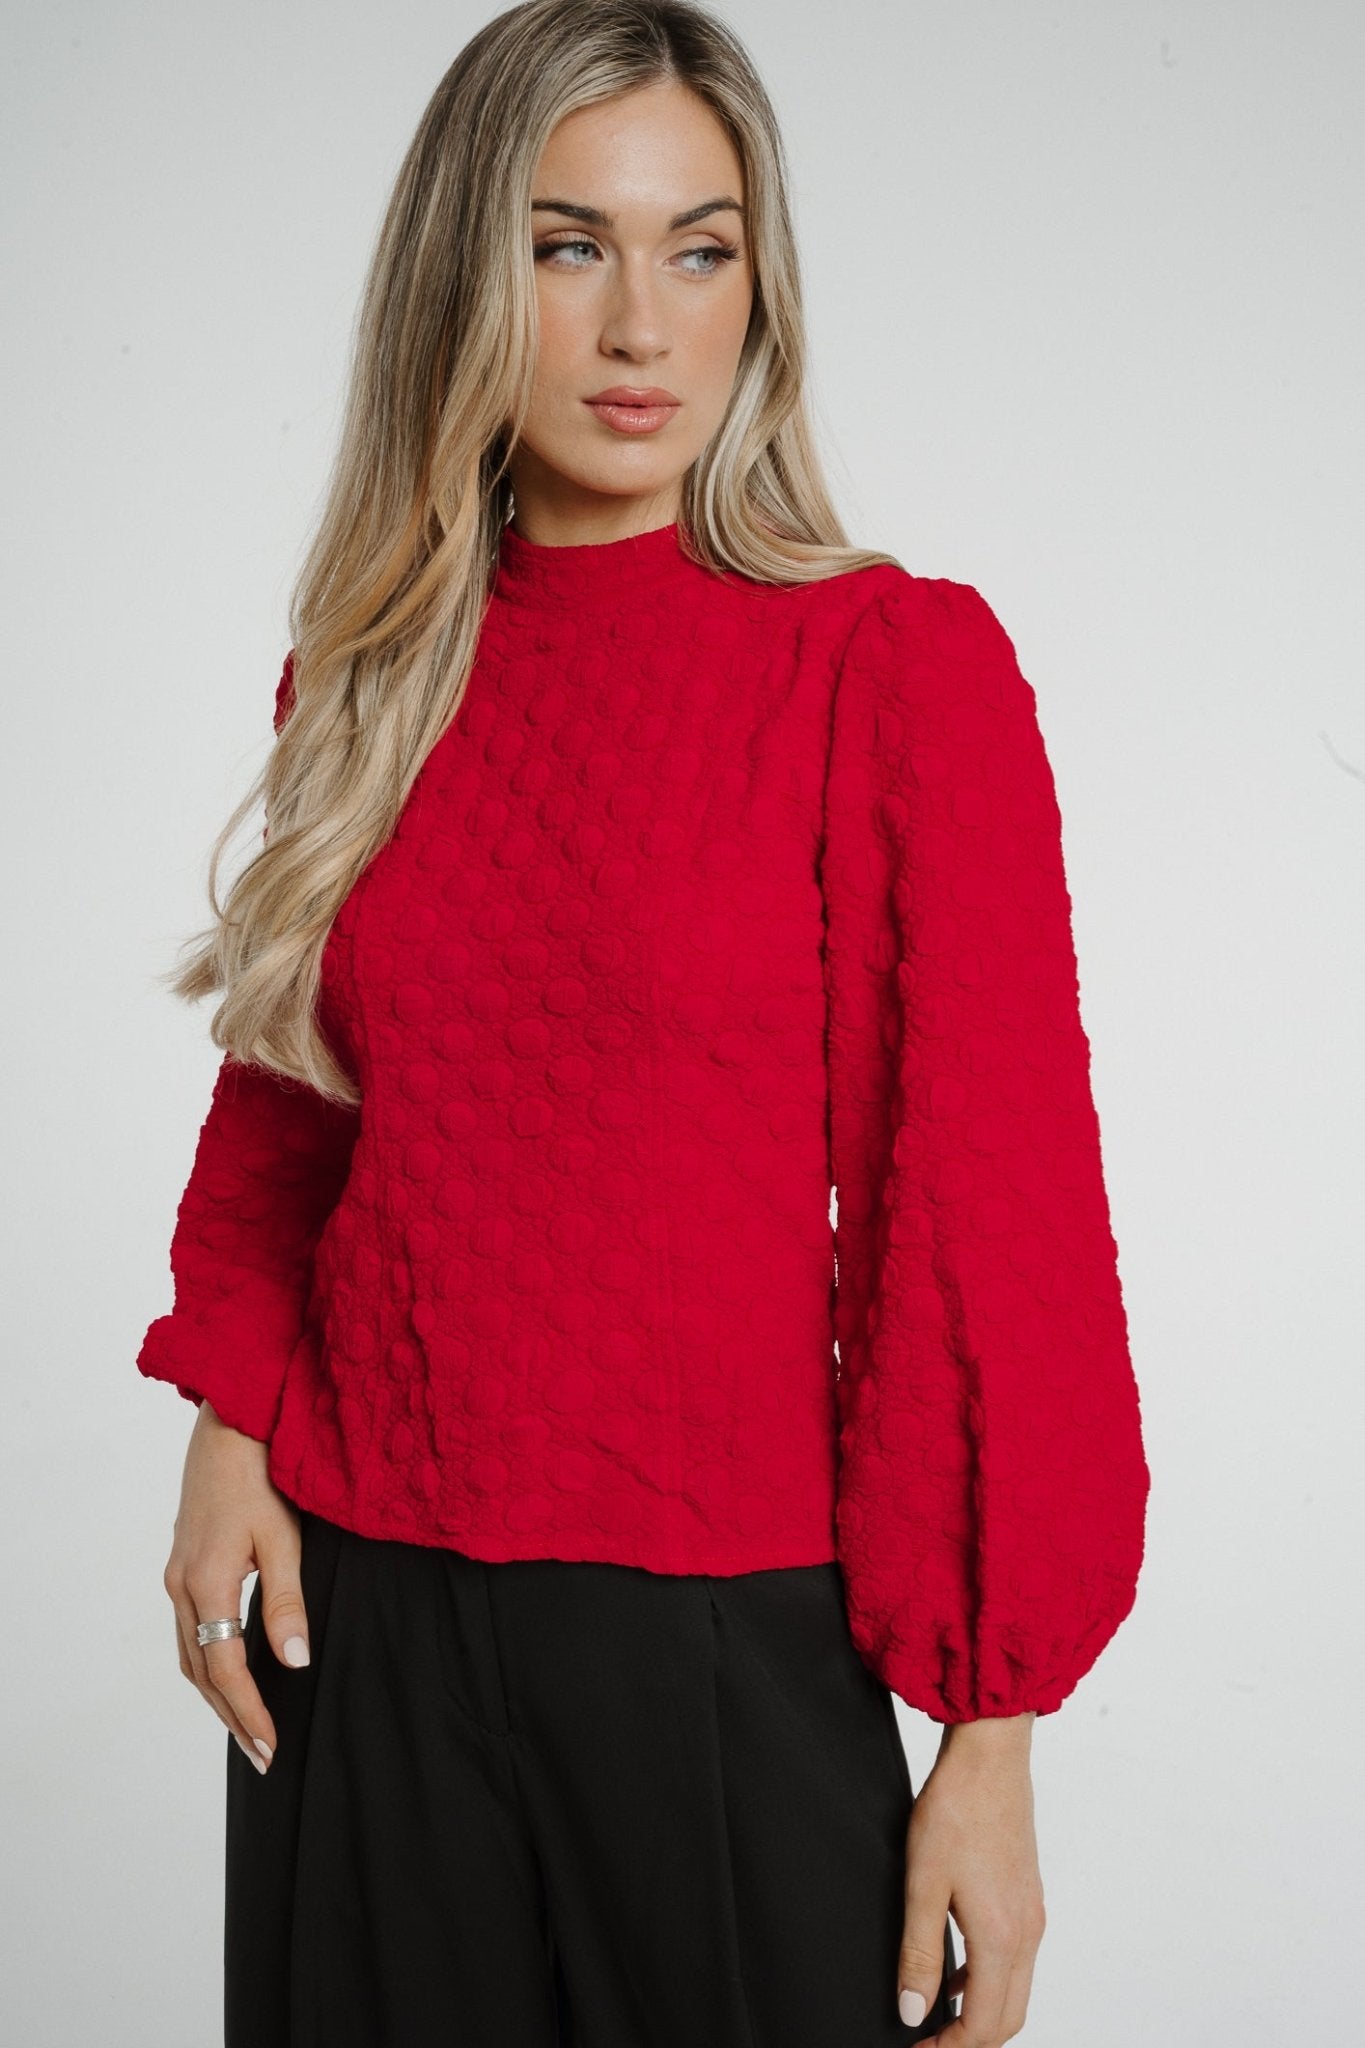 Paige Textured Top In Red - The Walk in Wardrobe